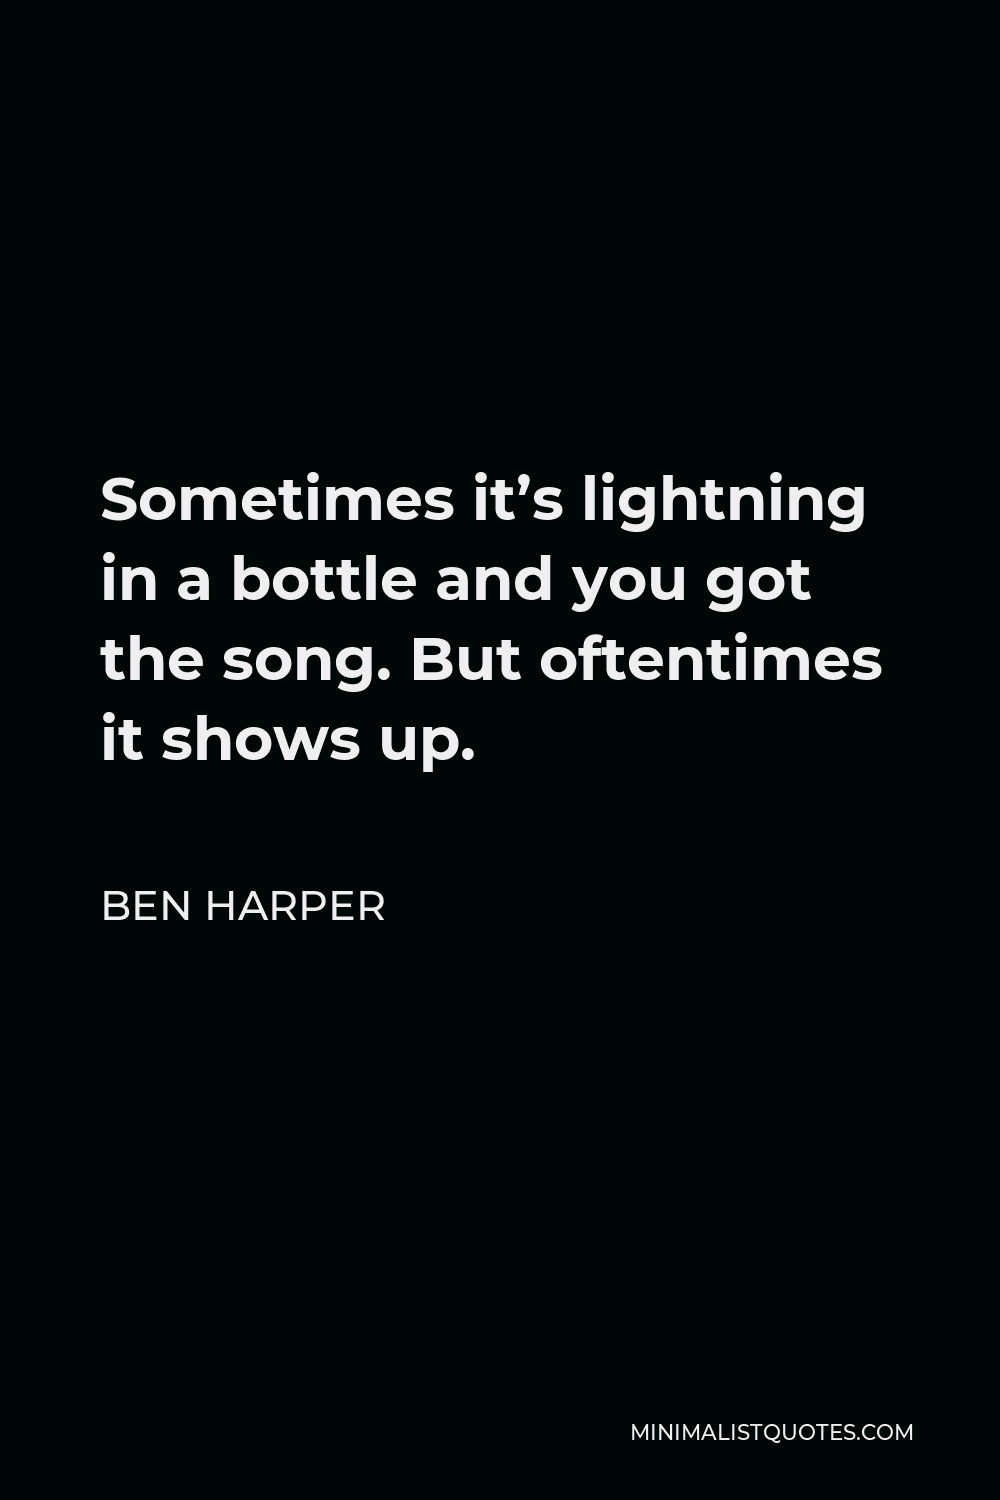 Ben Harper Quote - Sometimes it’s lightning in a bottle and you got the song. But oftentimes it shows up.